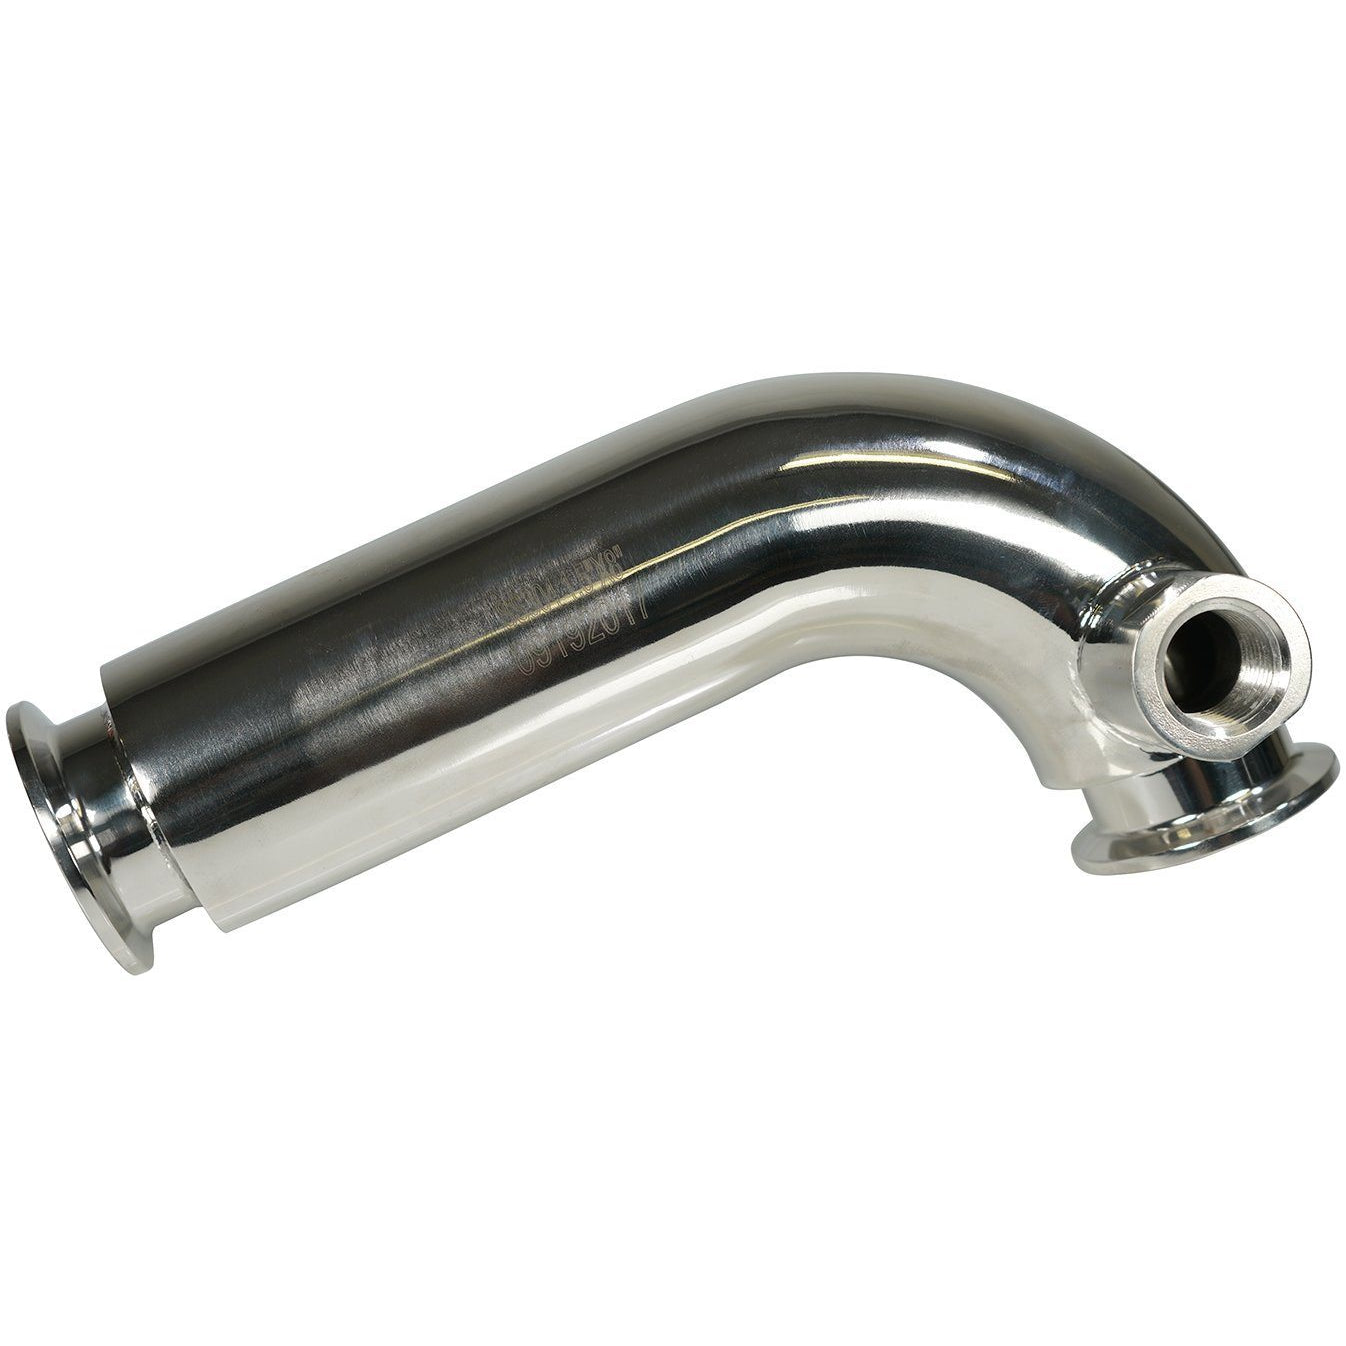 BVV, 1.5" Fully Jacketed Tri-Clamp x 8" 90 Degree Bend